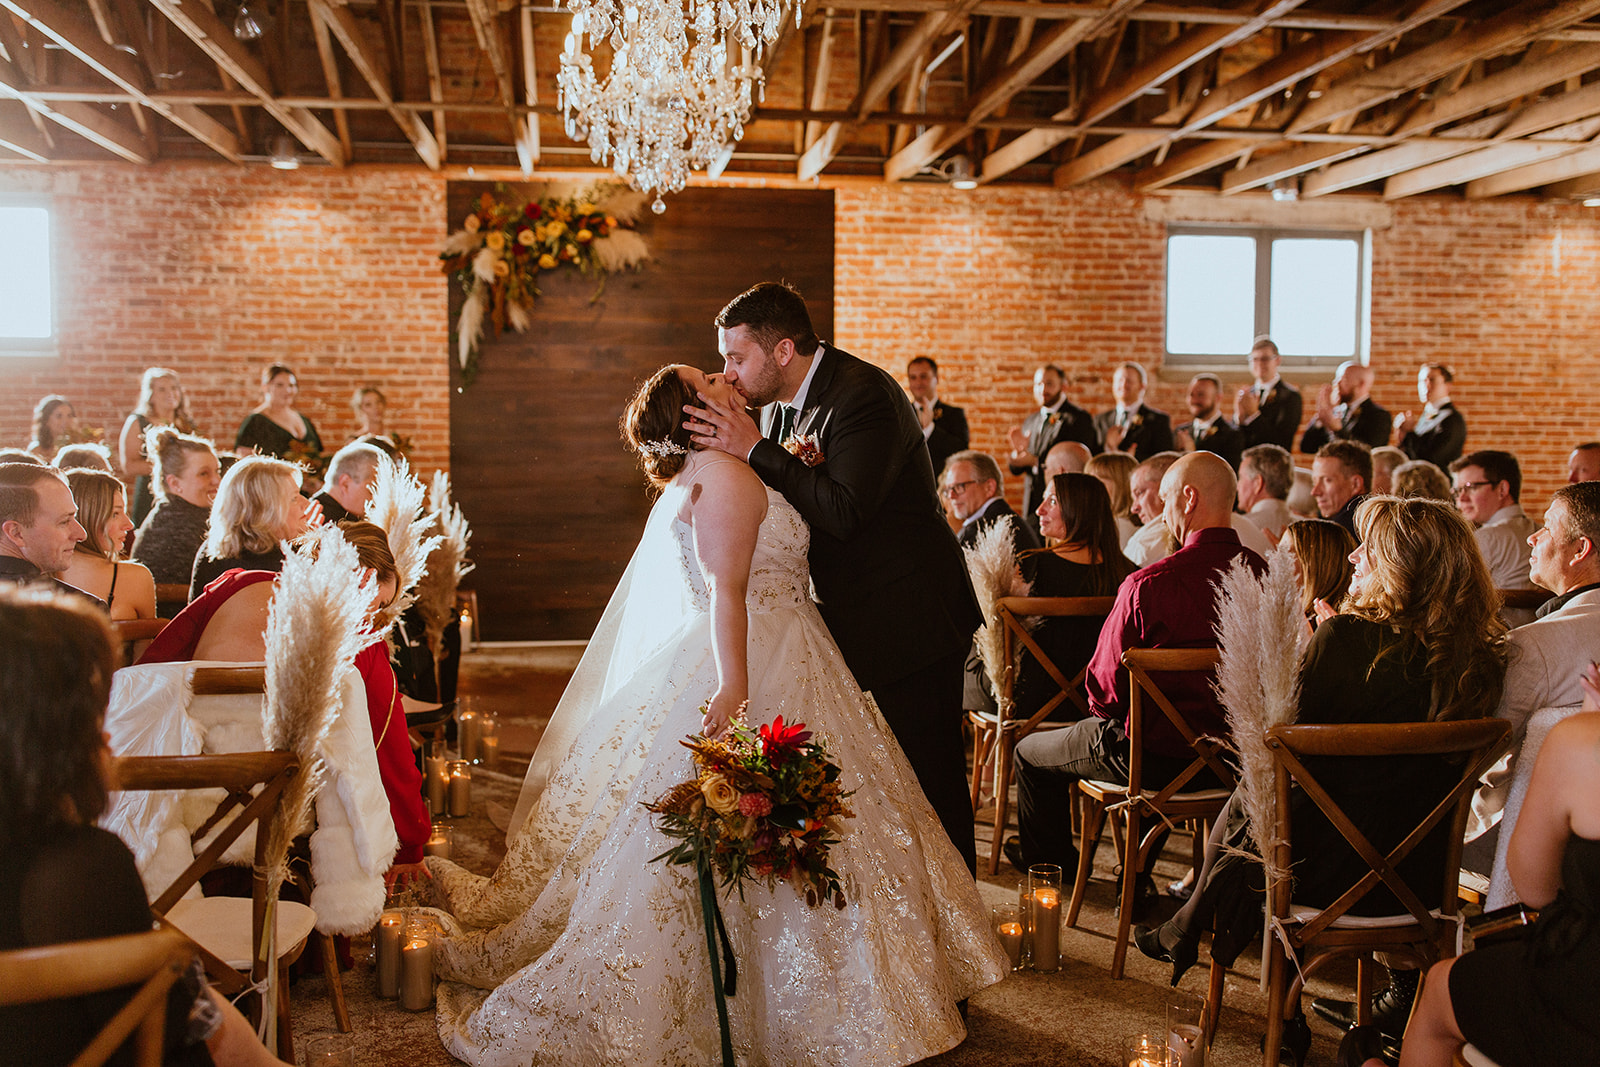 Couple kisses at the end of the aisle after getting married